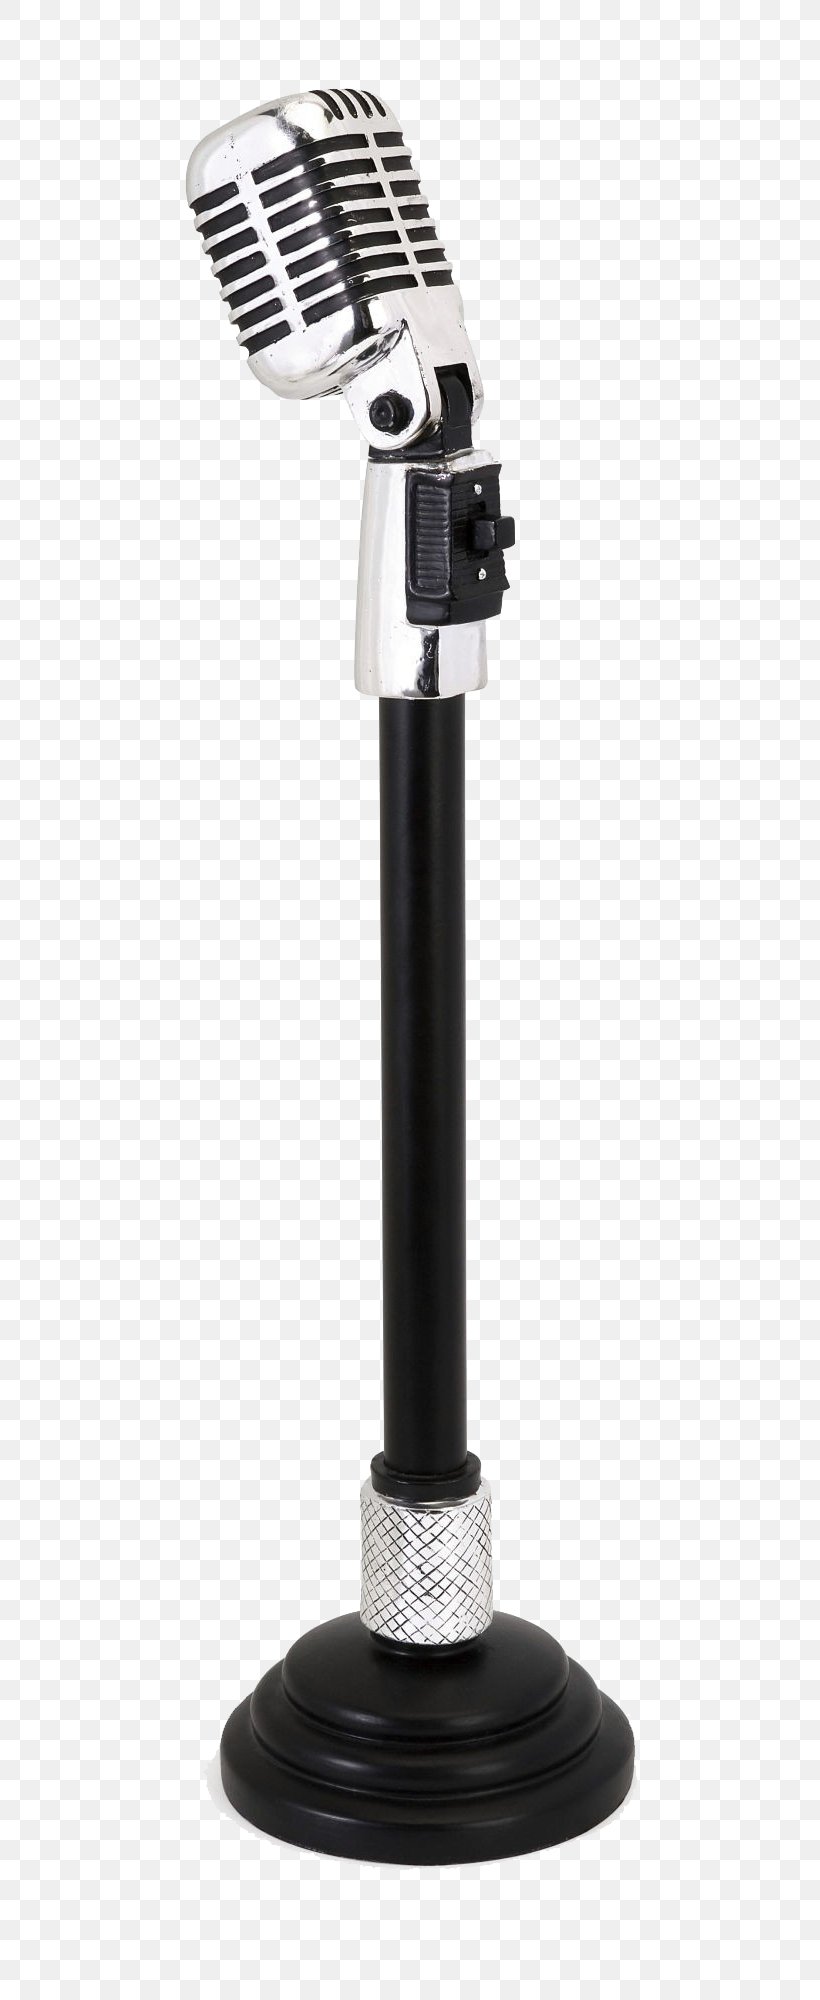 Microphone Stands Blue Microphones Yeti Recording Studio IPad Air, PNG, 712x2000px, Microphone, Announcer, Audio, Audio Equipment, Blue Microphones Yeti Download Free